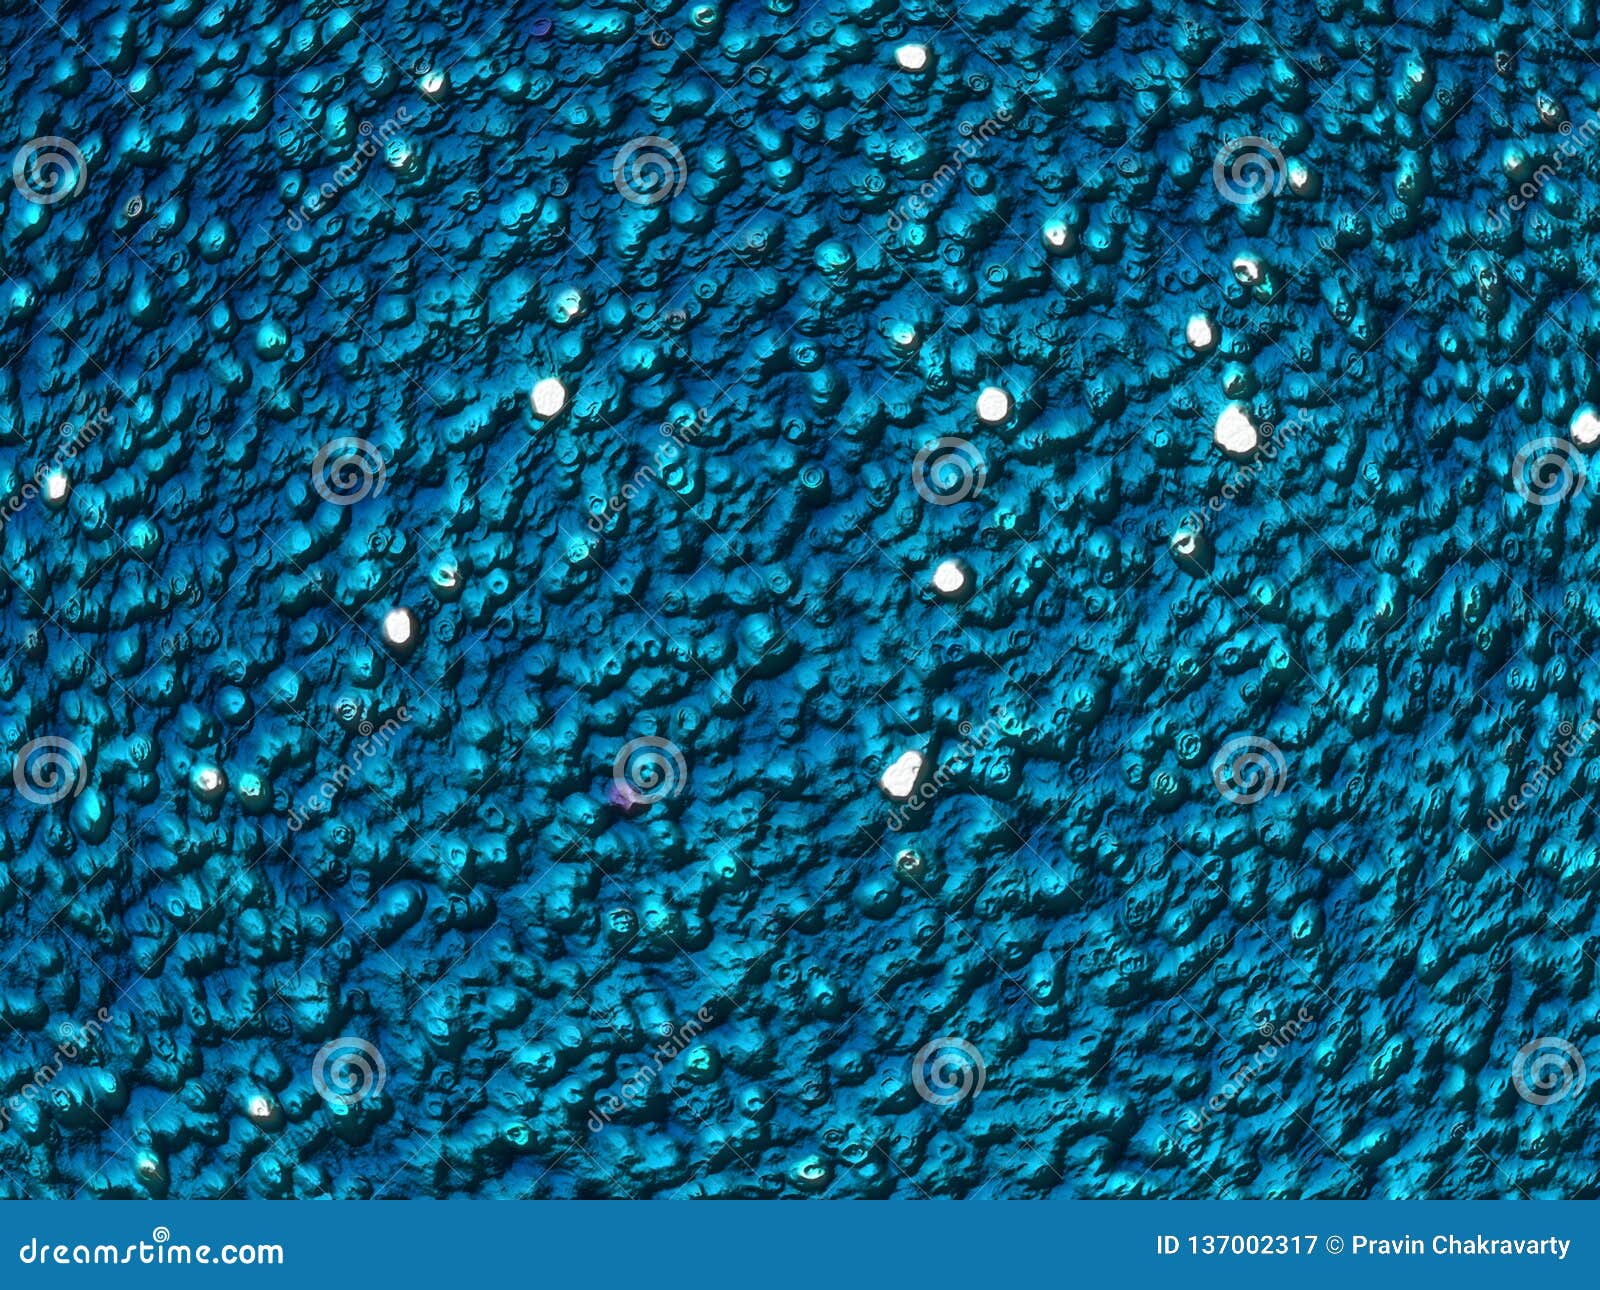 Abstract Blue Textured Background Wallpaper Stock Image Image